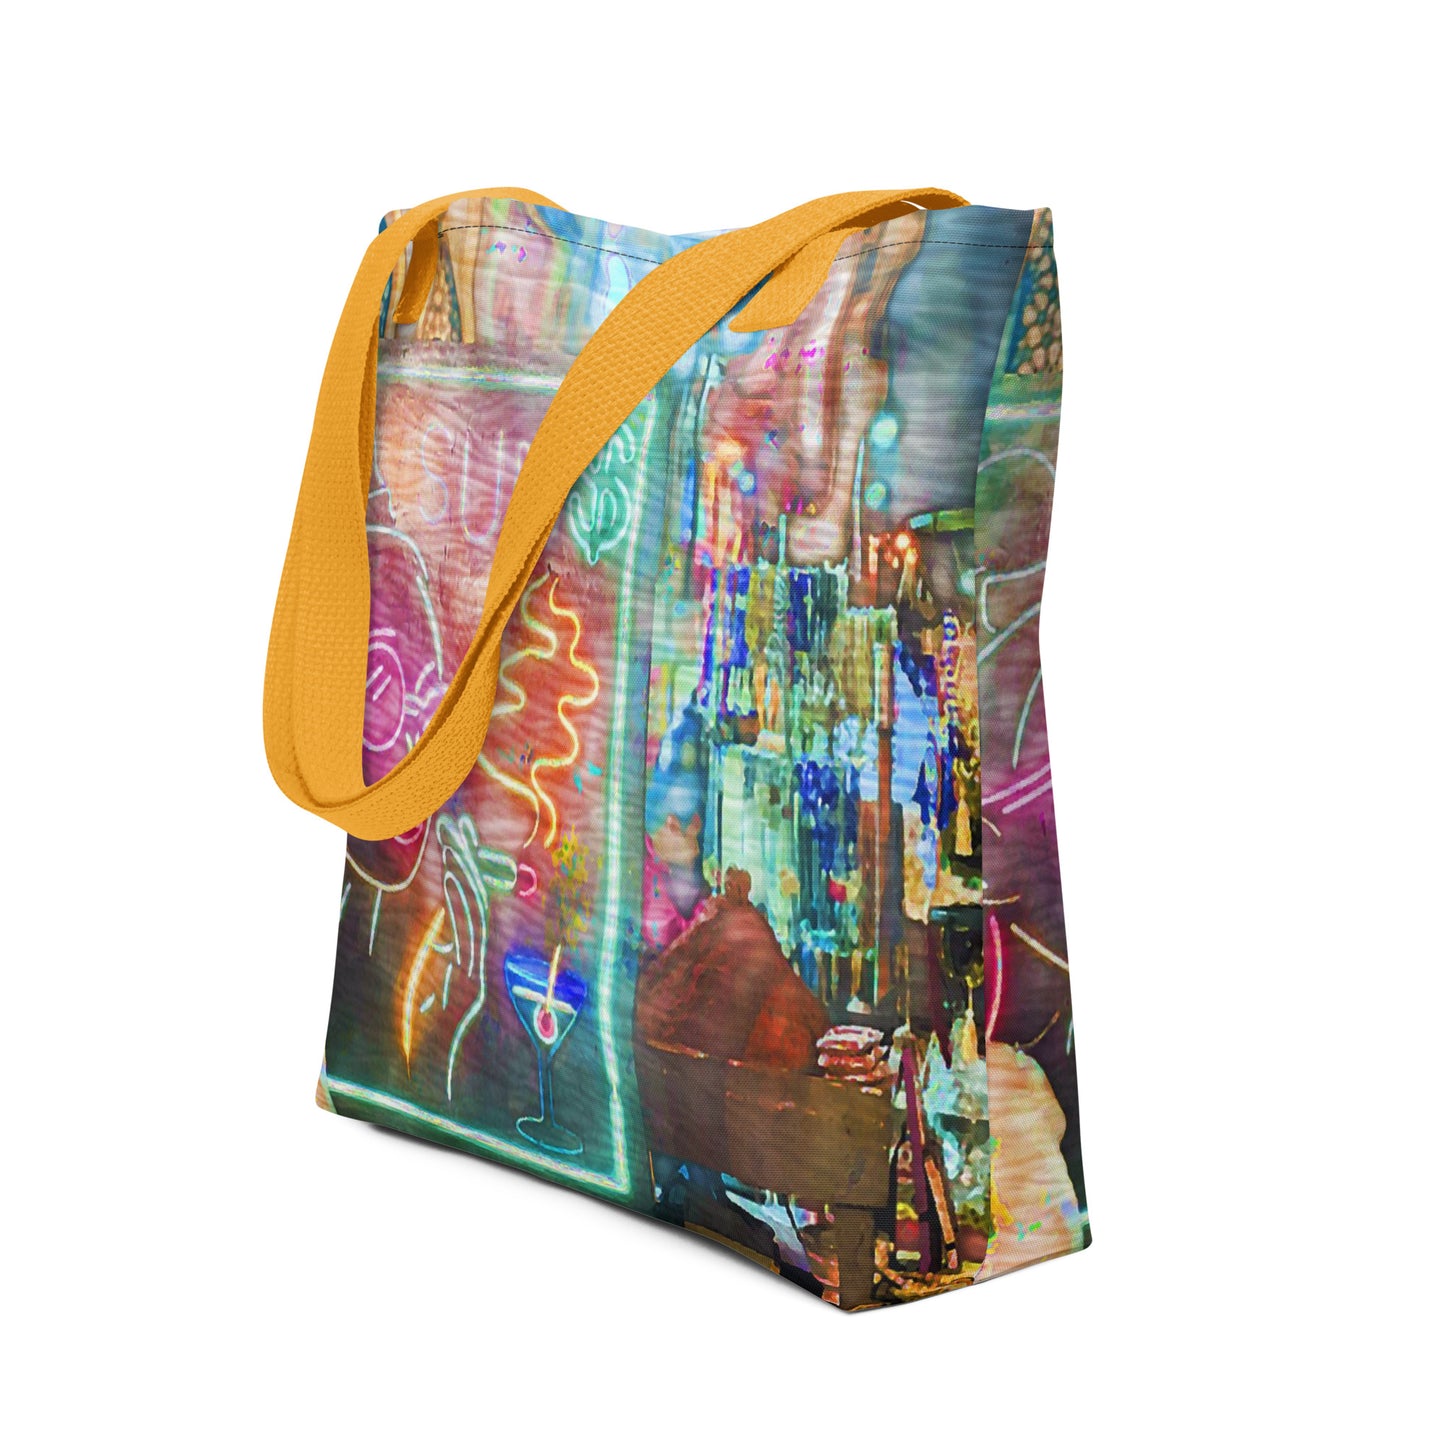 Tote Bag | Egyptian Vacation | by Bessan